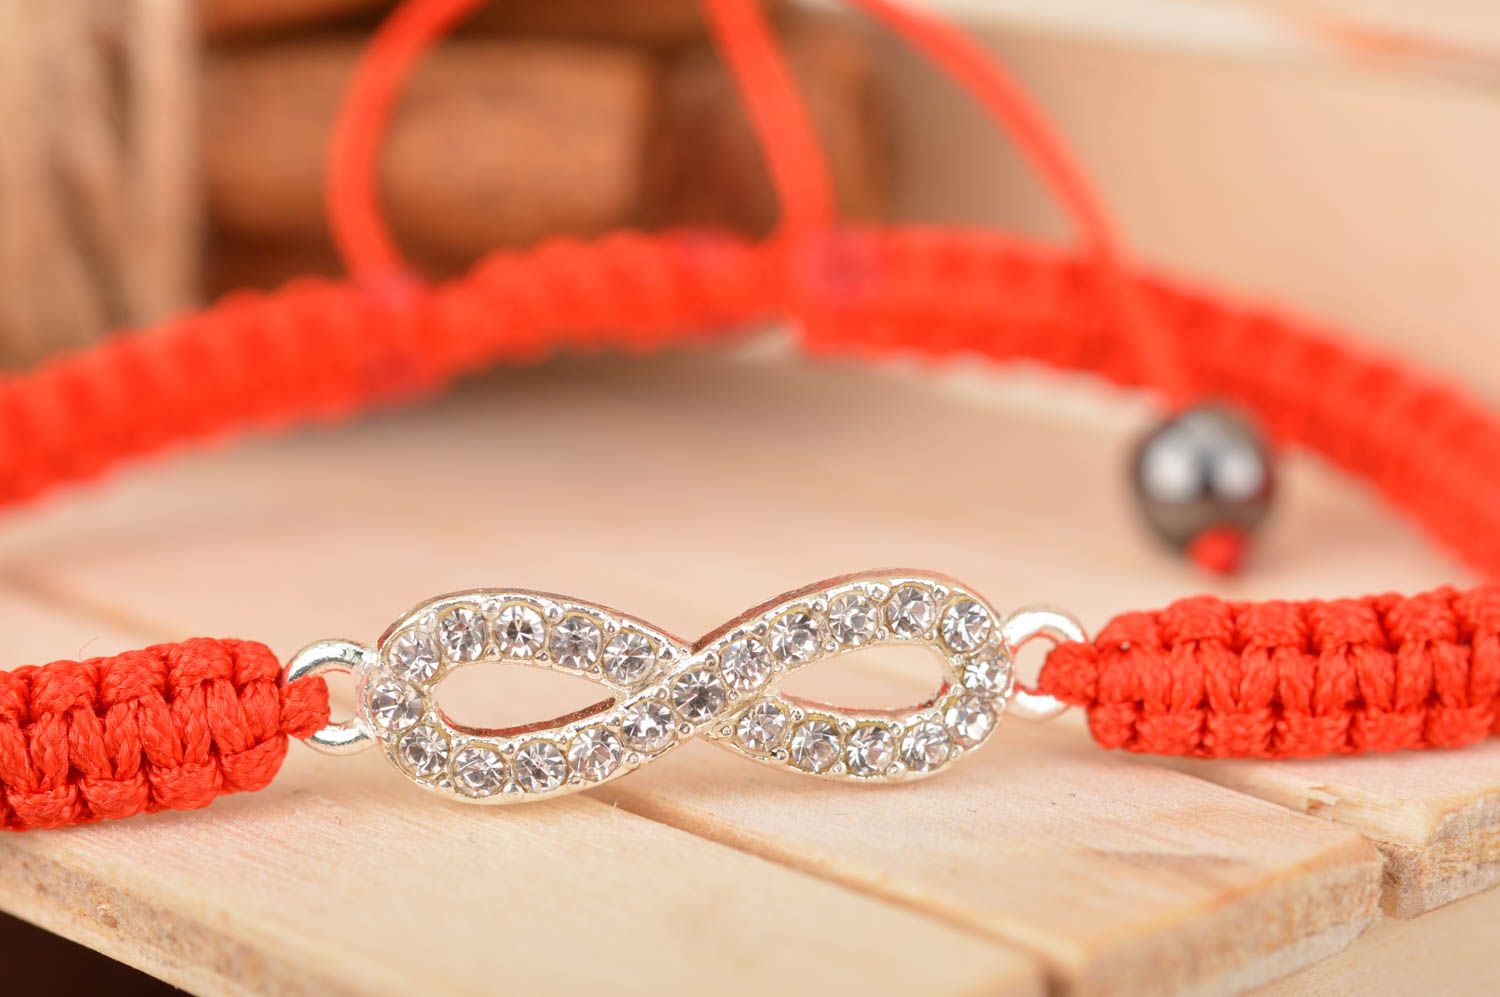 Handmade unusual cute stylish textile red thin bracelet with infinity sign photo 1